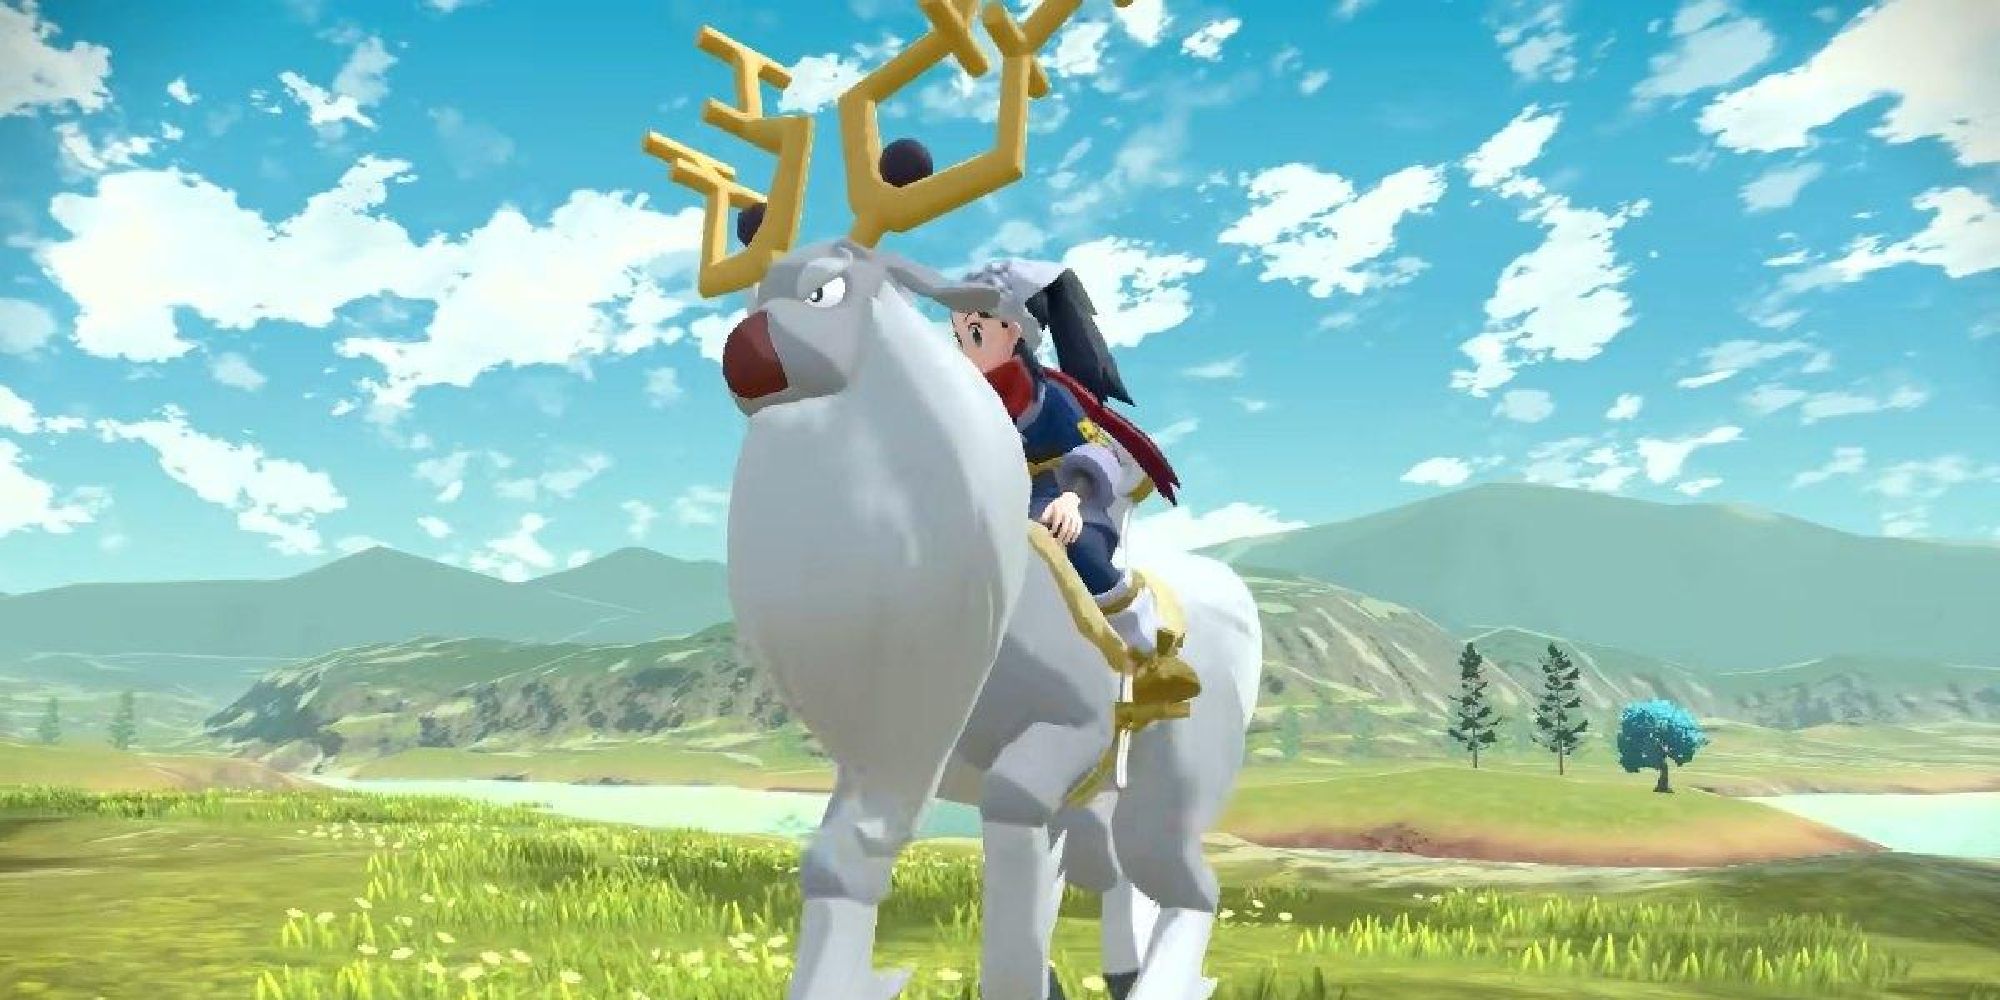 A player riding a Wyrdeer in Legends Arceus during the daytime